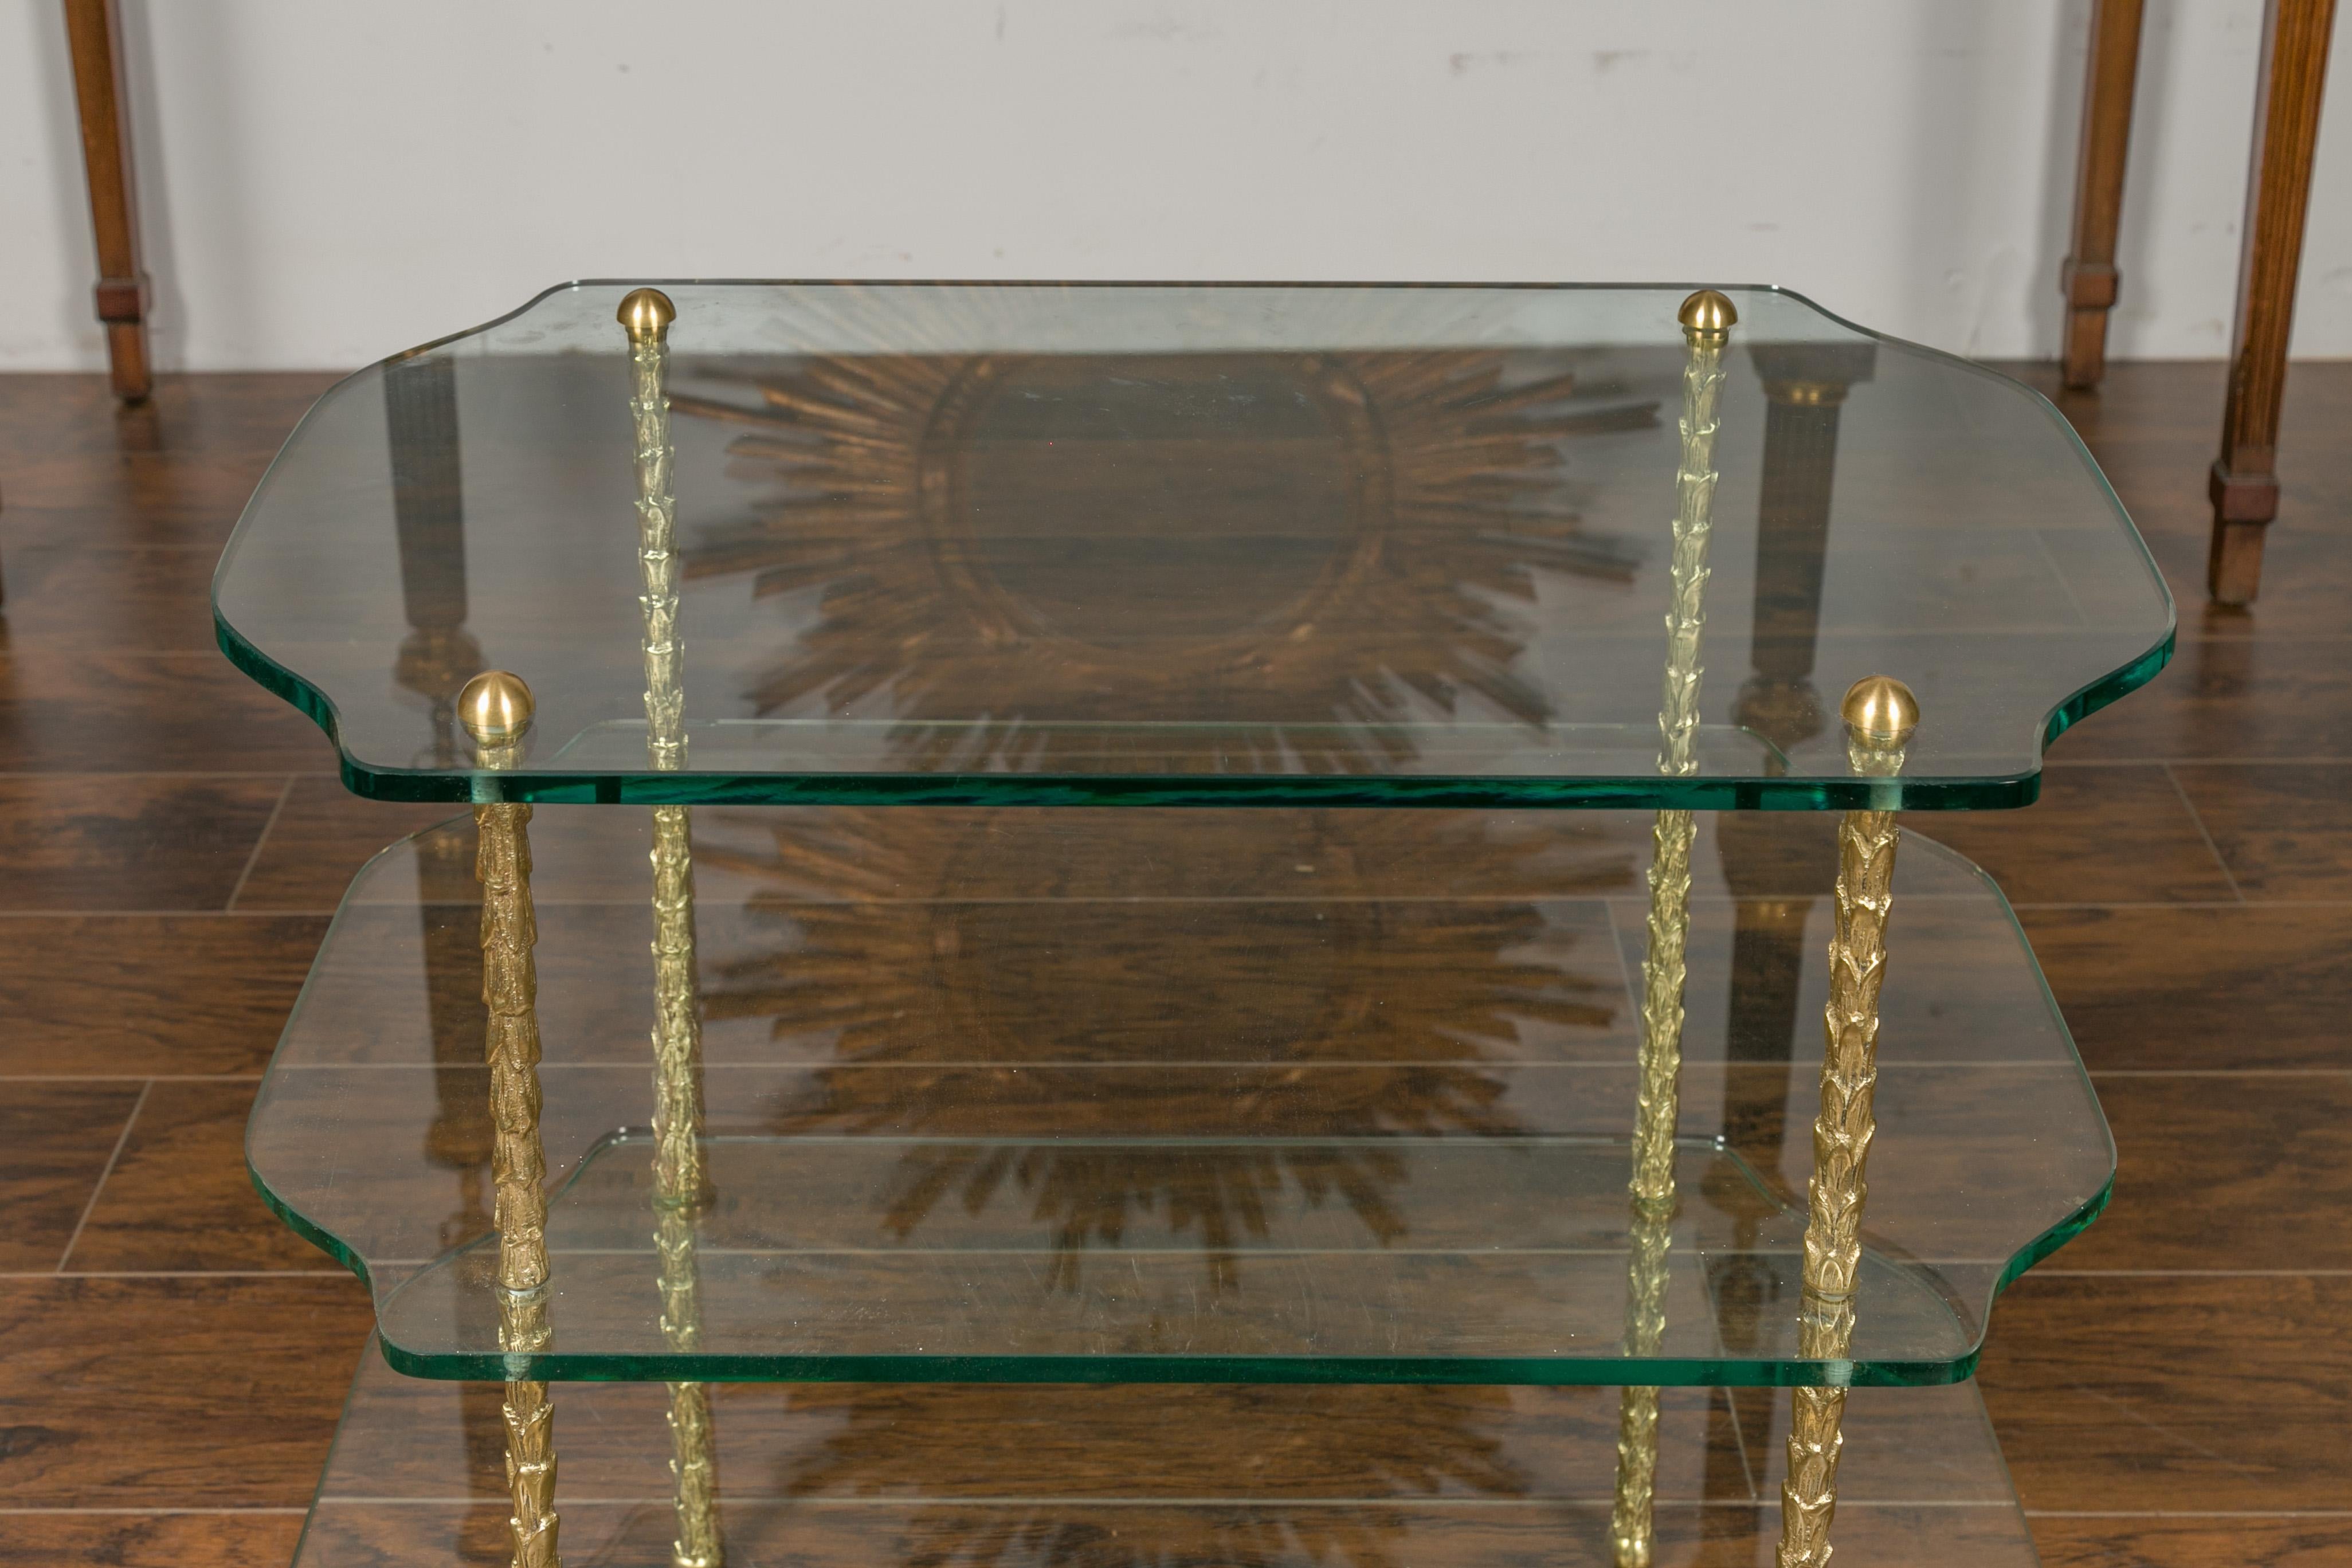 Mid-Century Modern Midcentury Brass Three-Tiered Table with Glass Shelves and Foliage Motifs For Sale